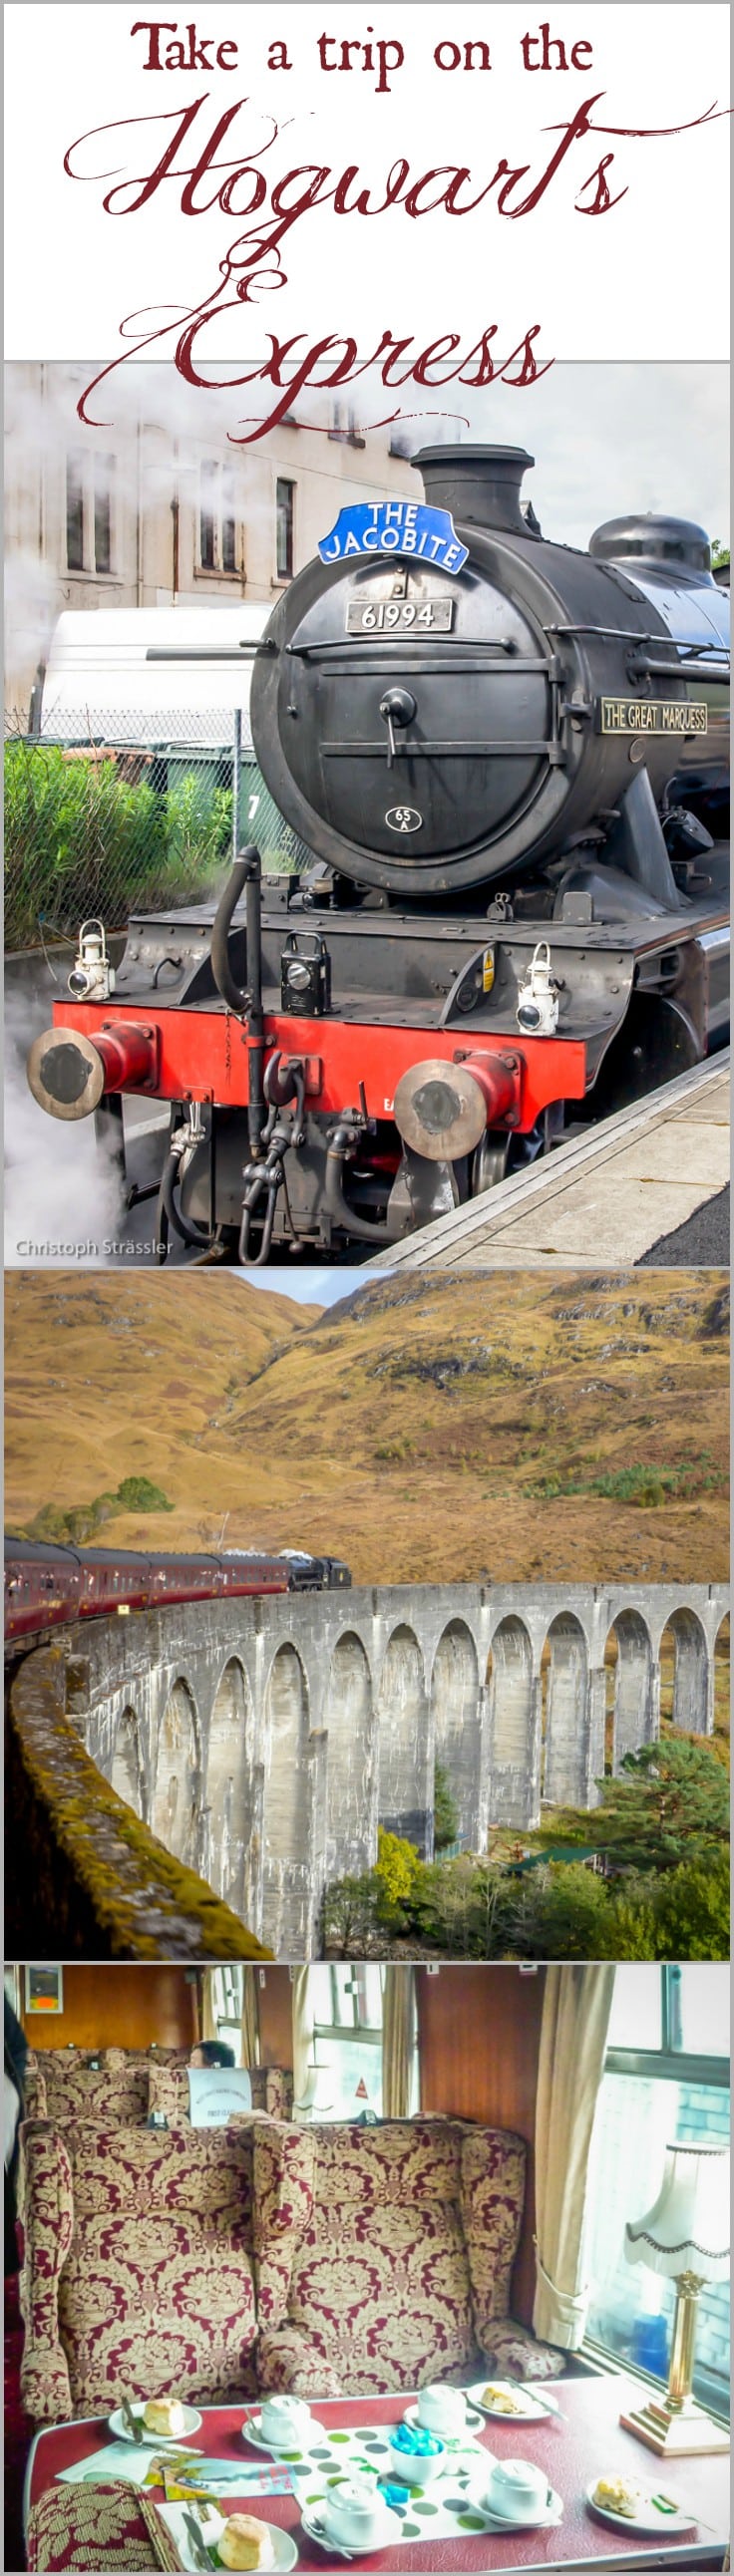 This is the REAL Hogwart's Express Train! Read about our trip on the Jacobite Steam Train, from Fort William to Mallaig on the West Coast of Scotland.